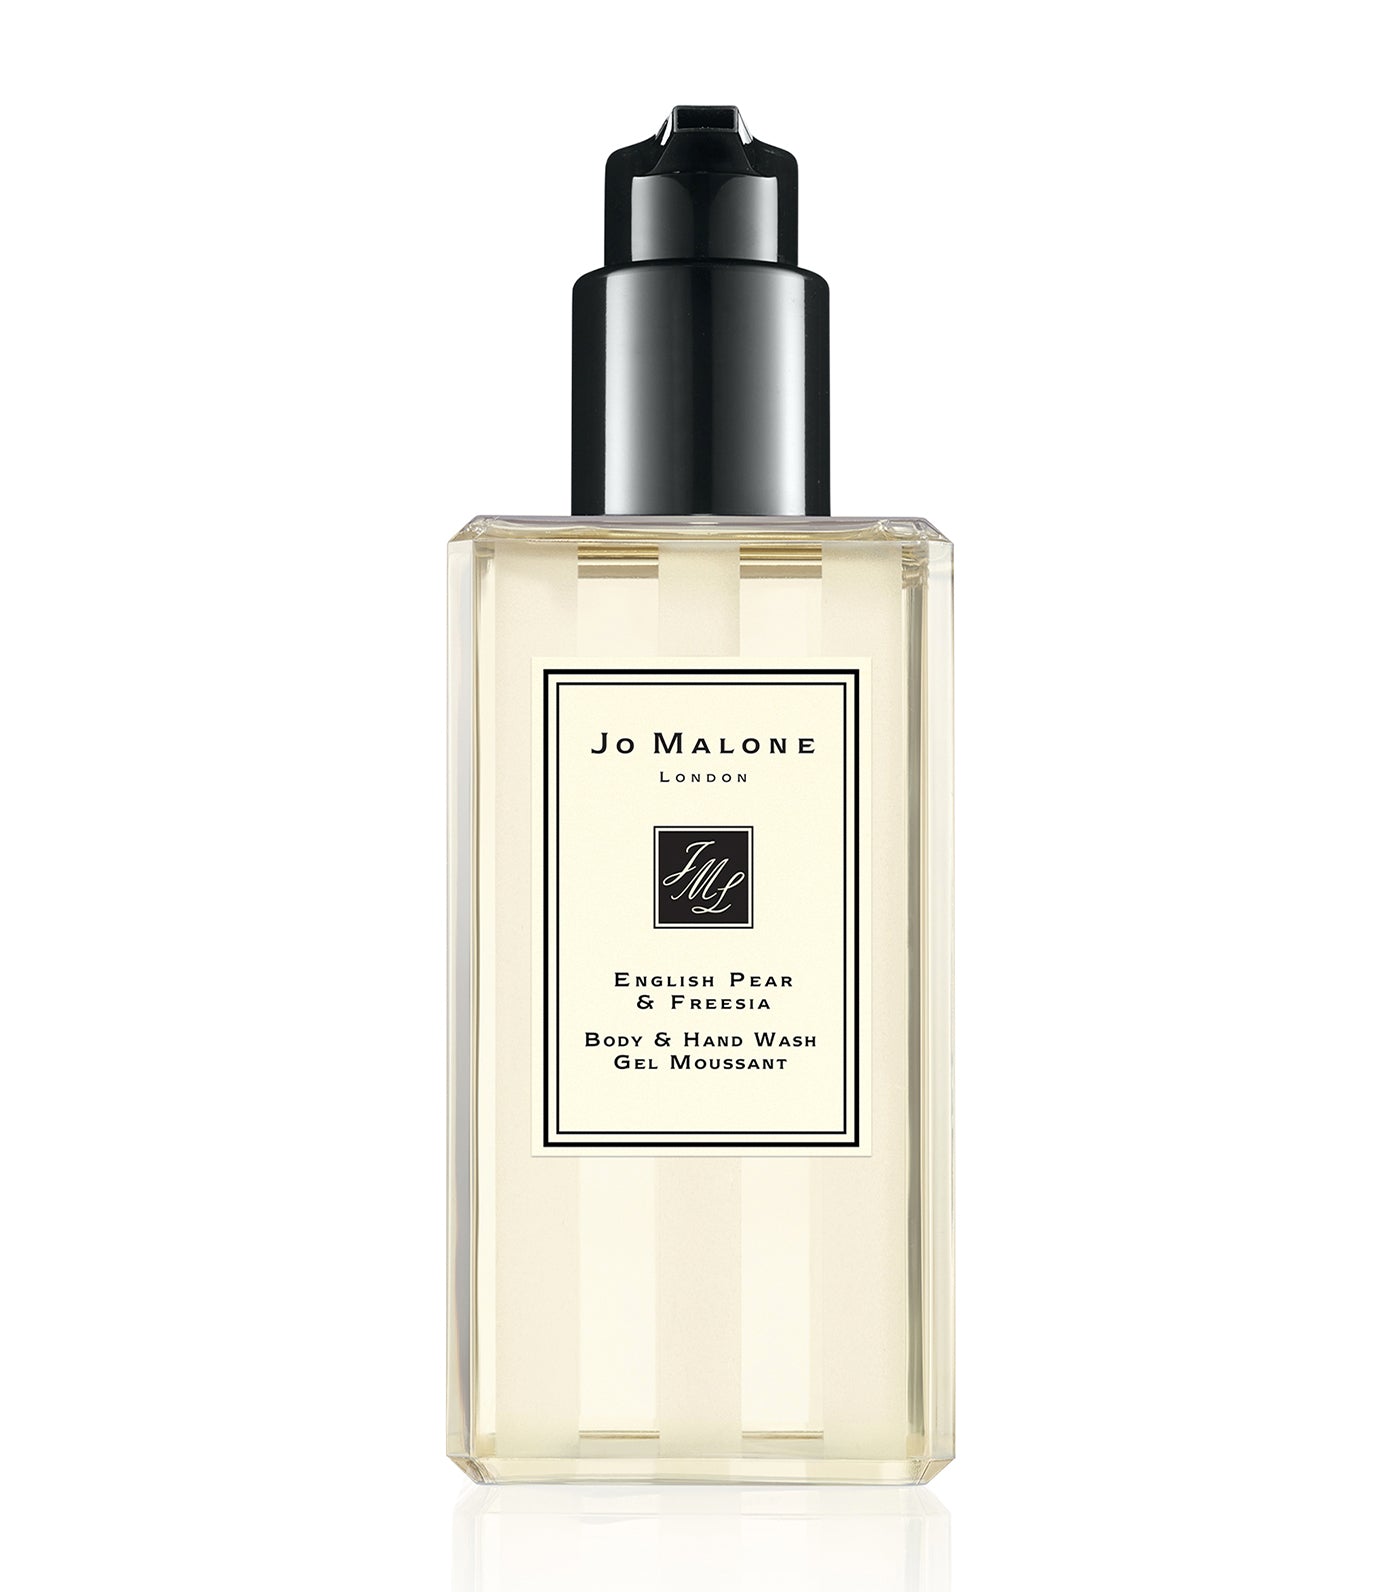 jo malone london english pear and freesia body and hand wash